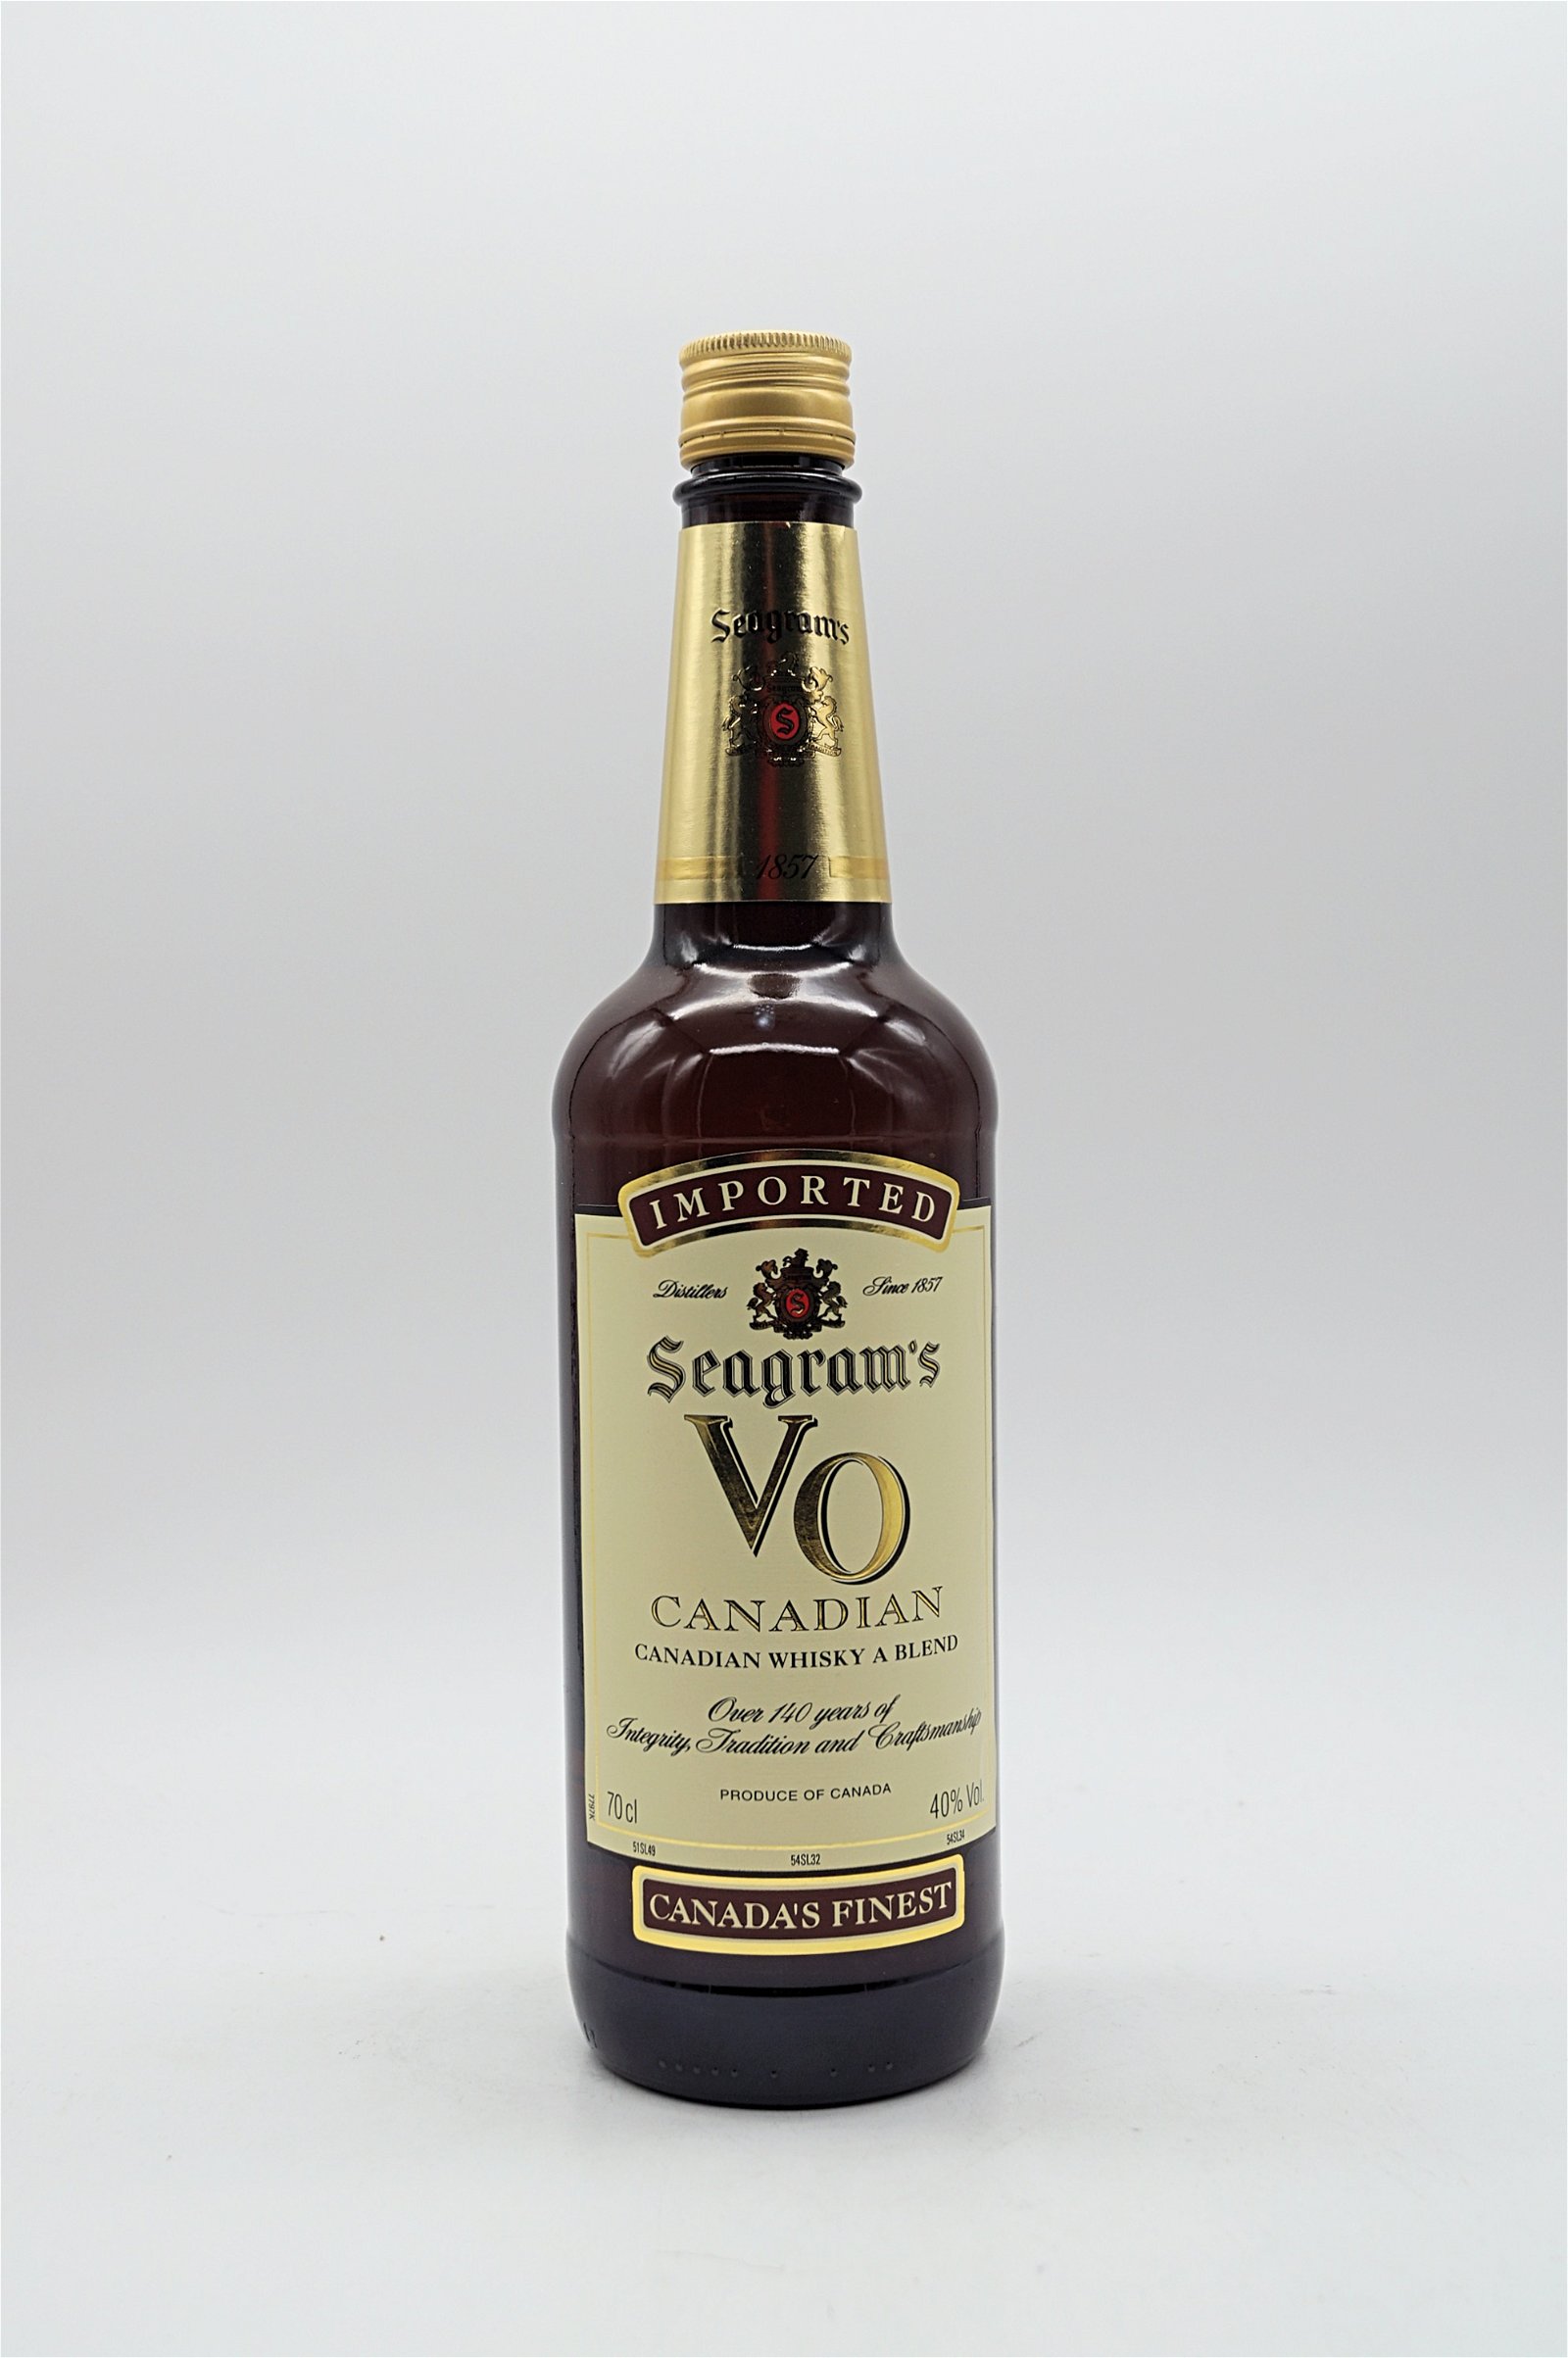 Seagrams VO Canadian blended Whisky